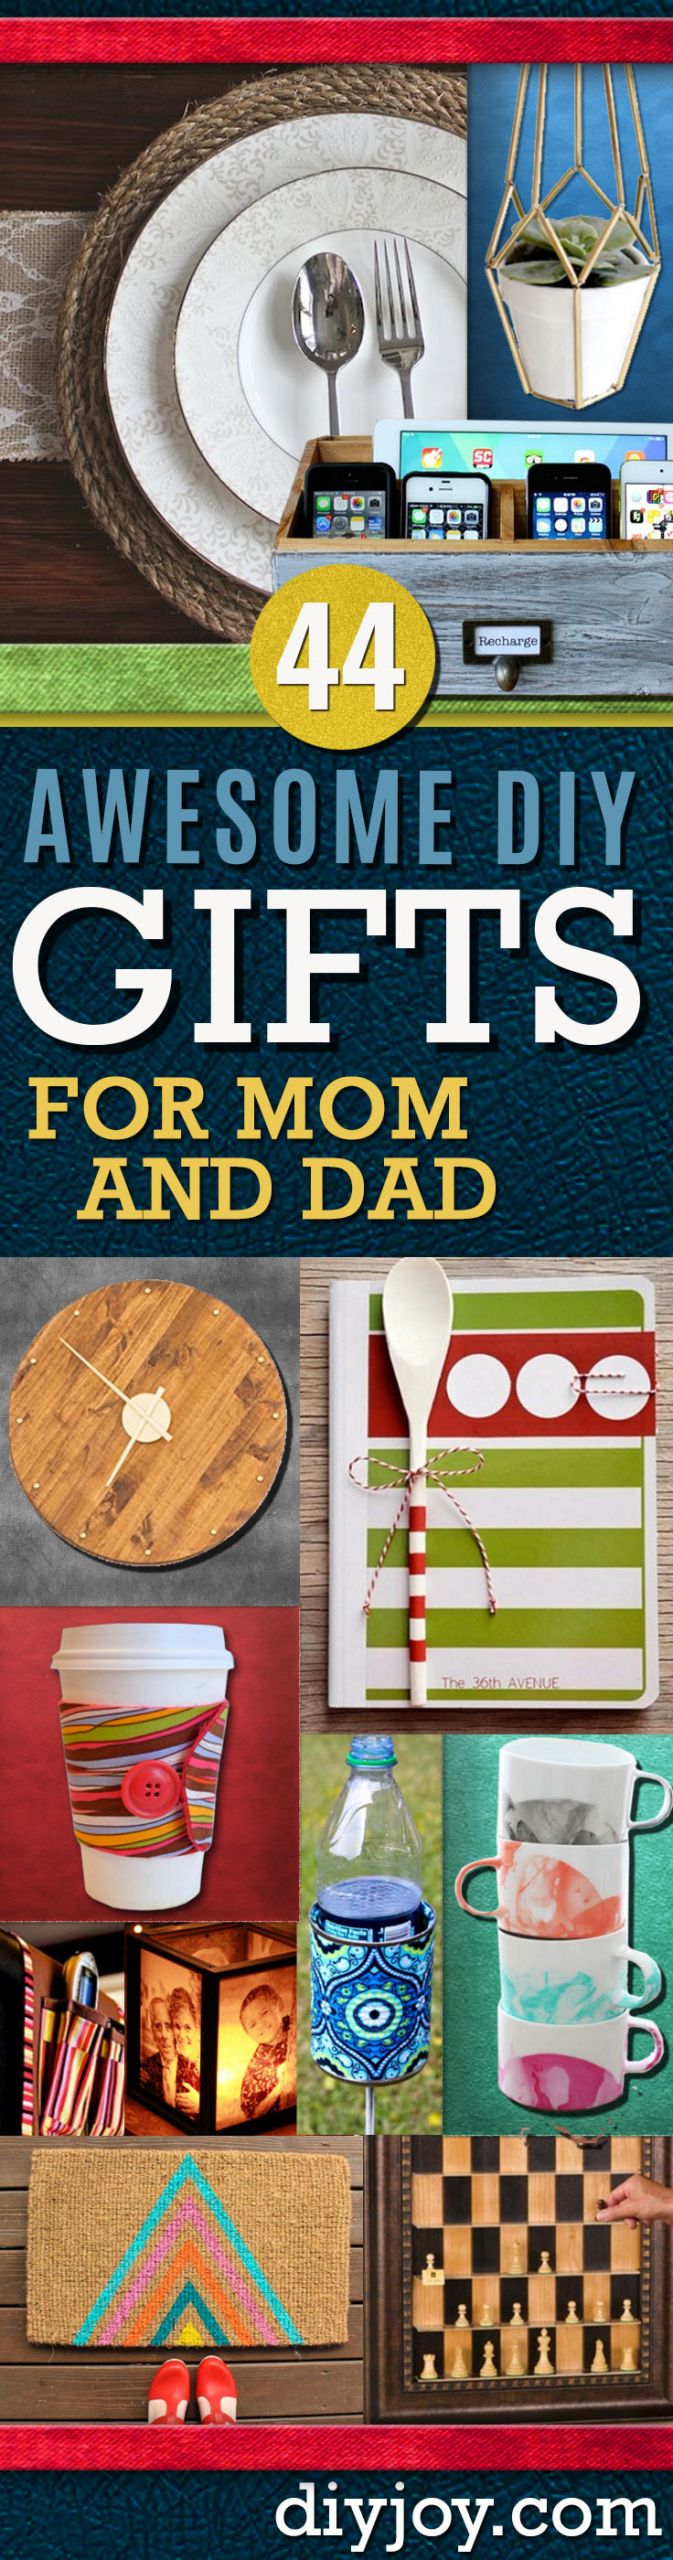 DIY Christmas Presents For Dad
 Awesome DIY Gift Ideas Mom and Dad Will Love